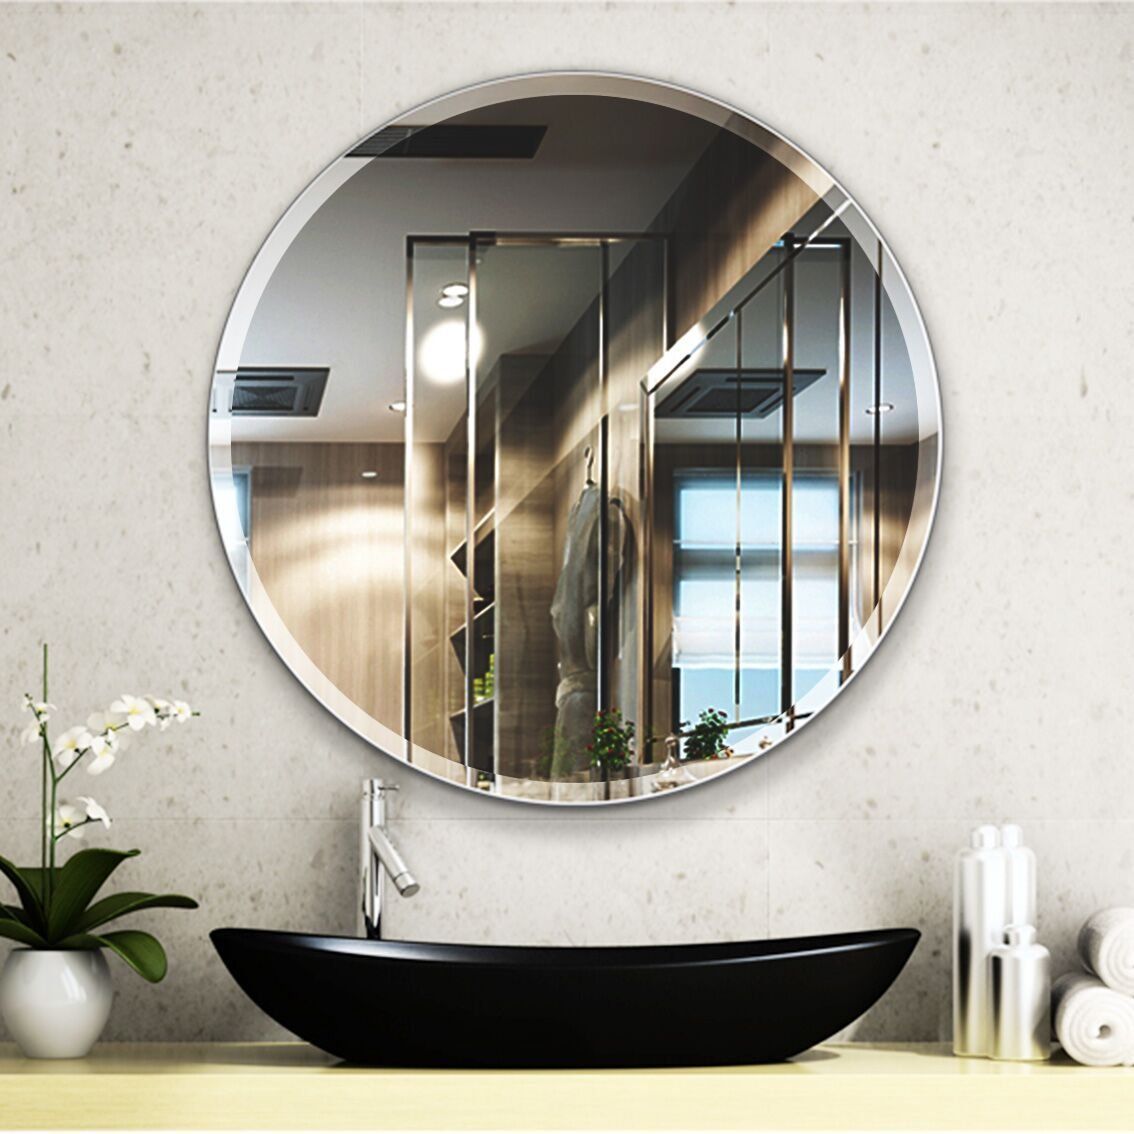 28 Inch Round Frameless Mirror Large Beveled Wall Mirror | Mirror Wall In Crown Frameless Beveled Wall Mirrors (View 9 of 15)